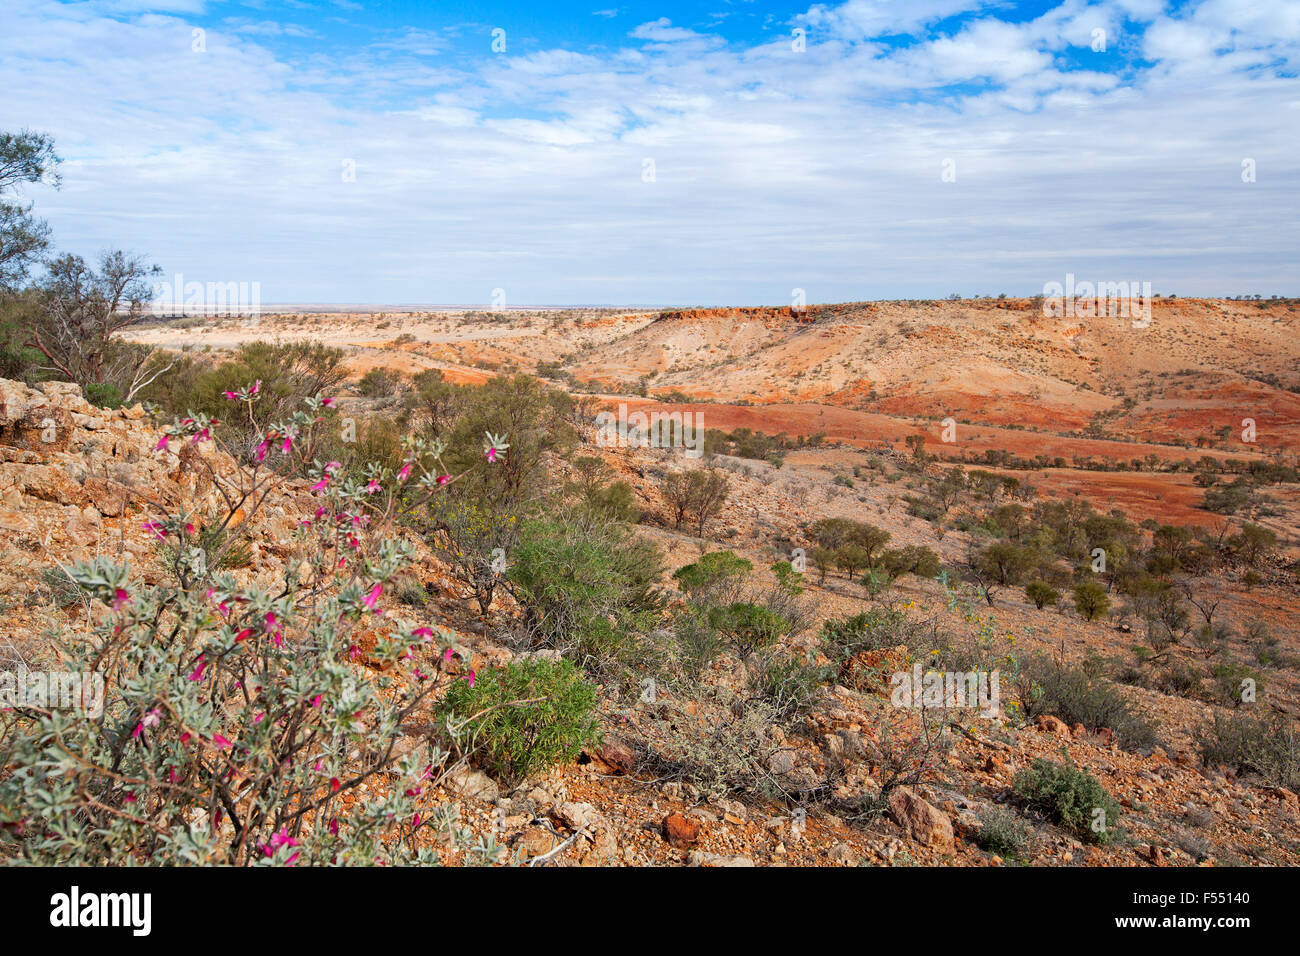 Stunning Australian outback landscape from hilltop lookout, deep valley hemmed by stony red barren hills, wildflowers in foreground, under blue sky Stock Photo